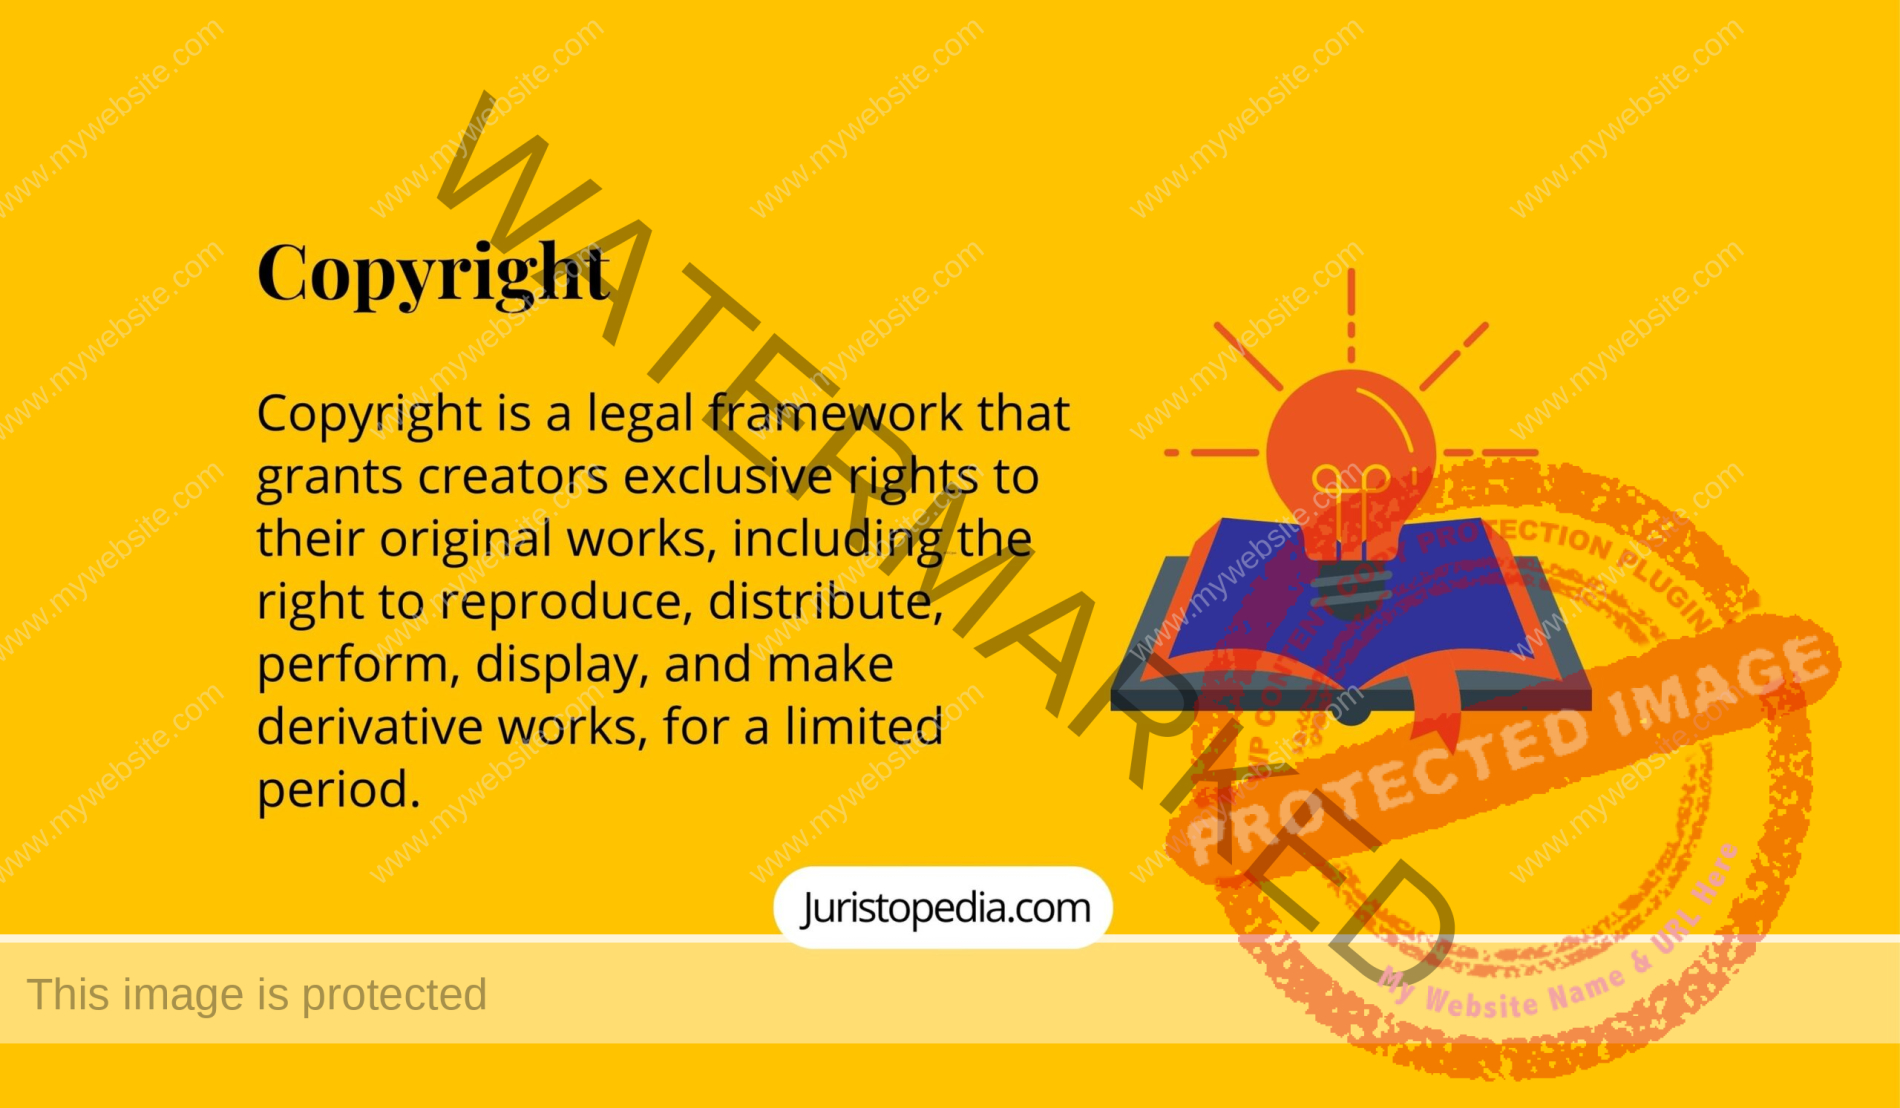 Copyright - derivative works - copyright law - TRIPS - right to reproduce and distribute - author's works